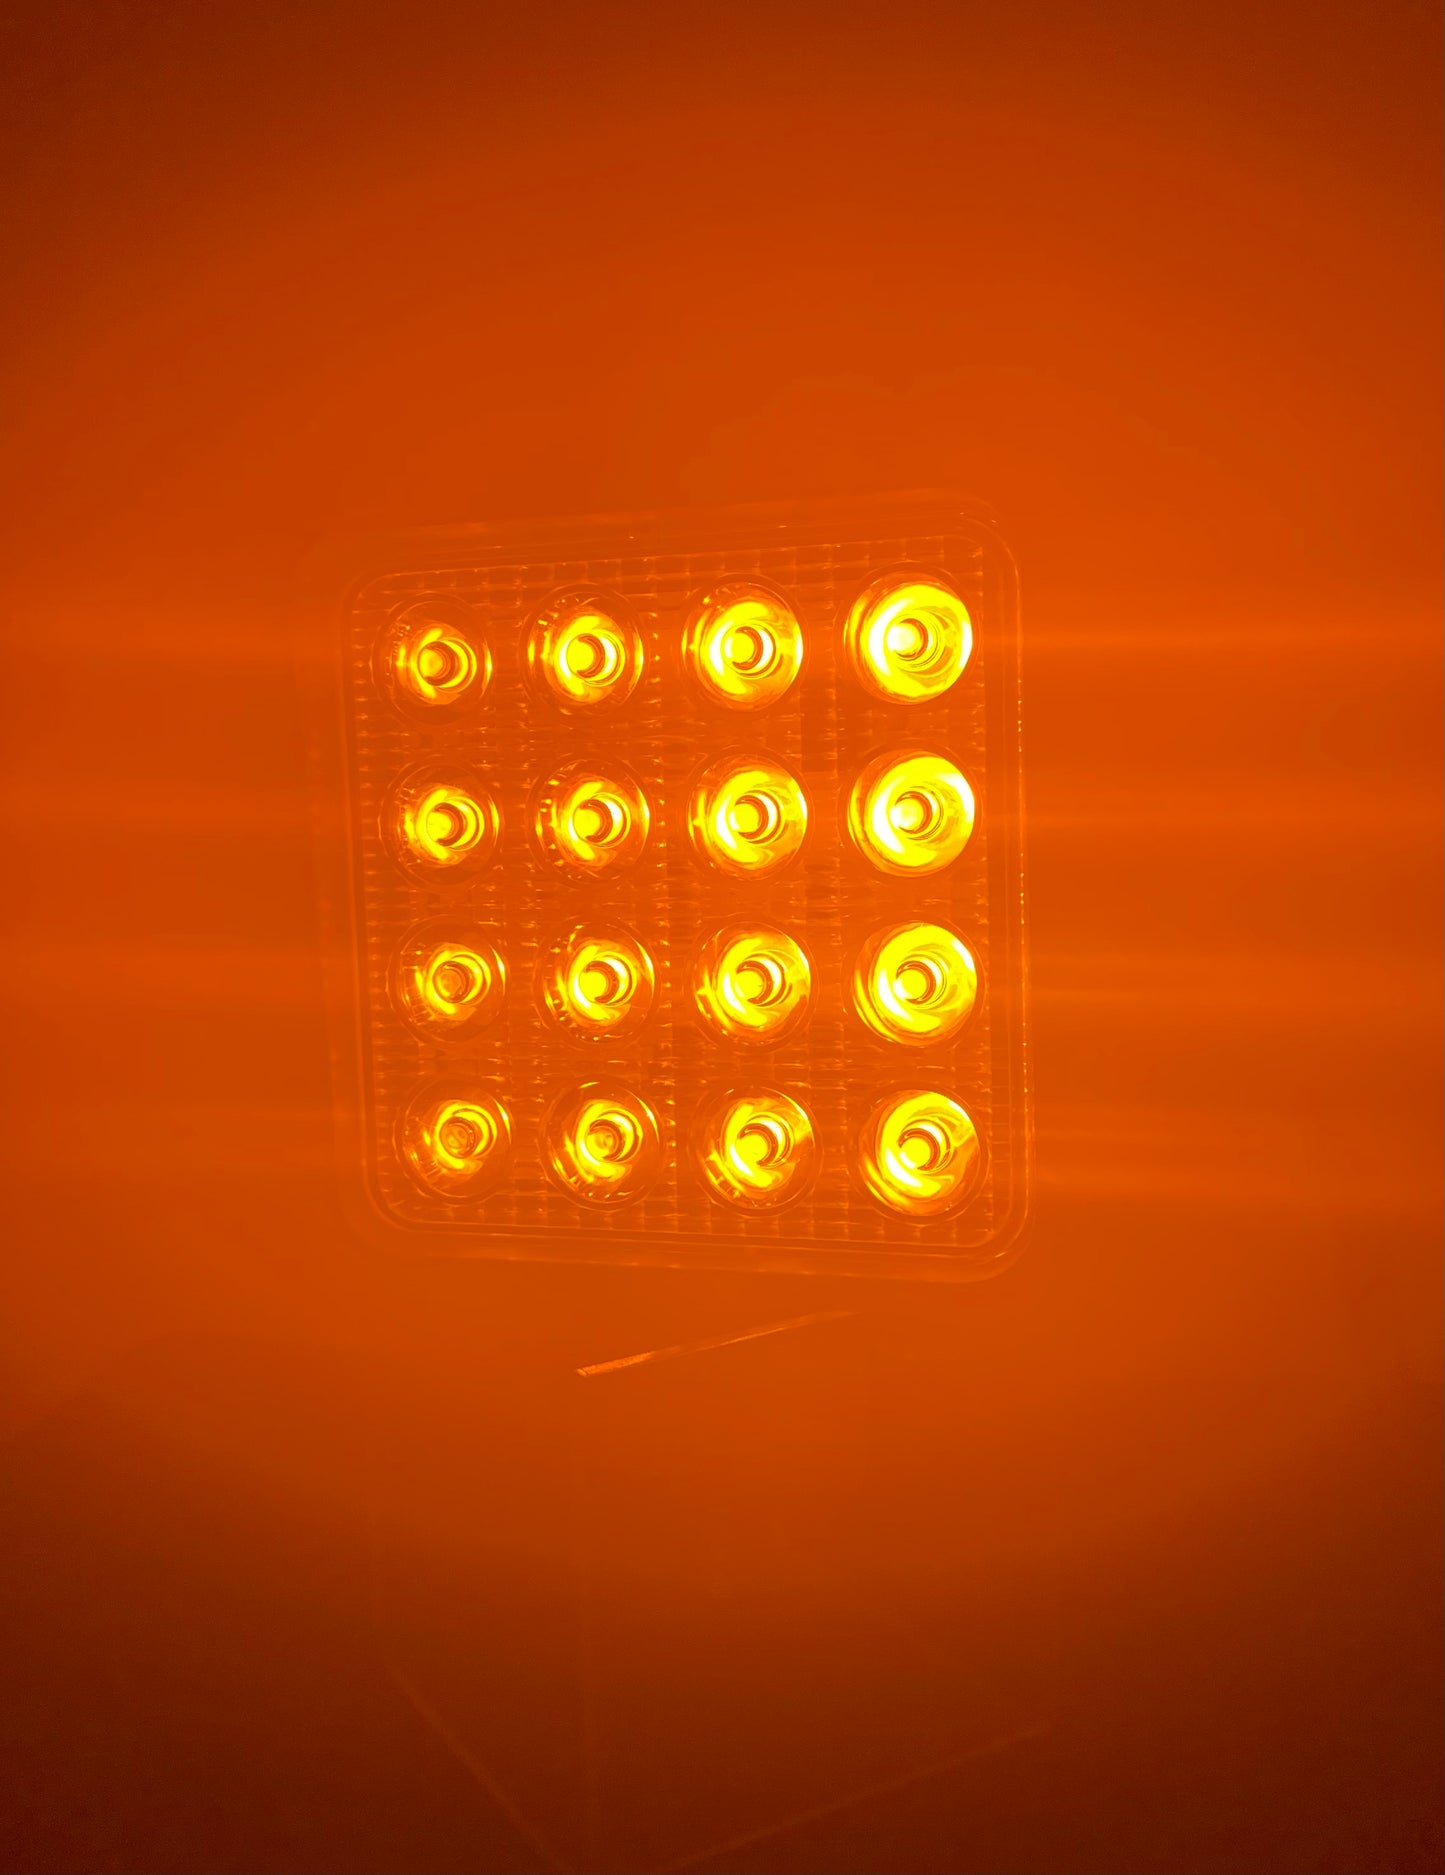 4x4 Off-Road HD Light With 5 Functions Including Strobe/Emergency Setting